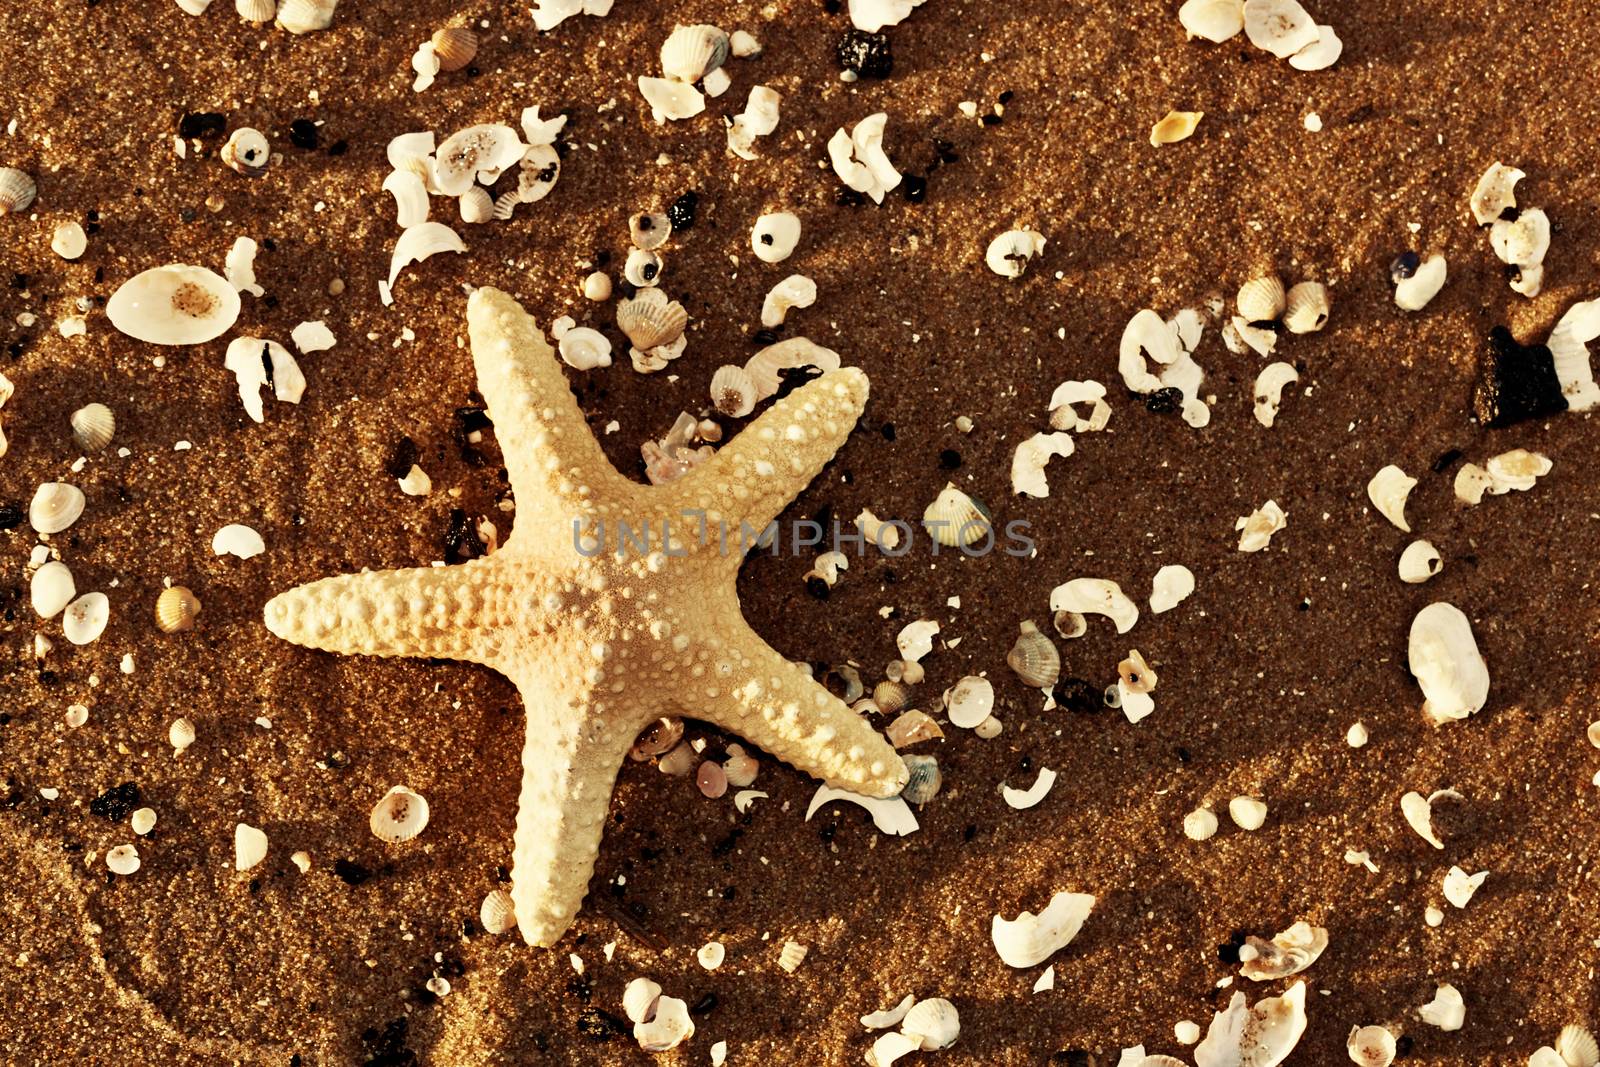 Starfish and sea shells on the exotic beach at warm sunset. Travel, vacation, holidays concepts